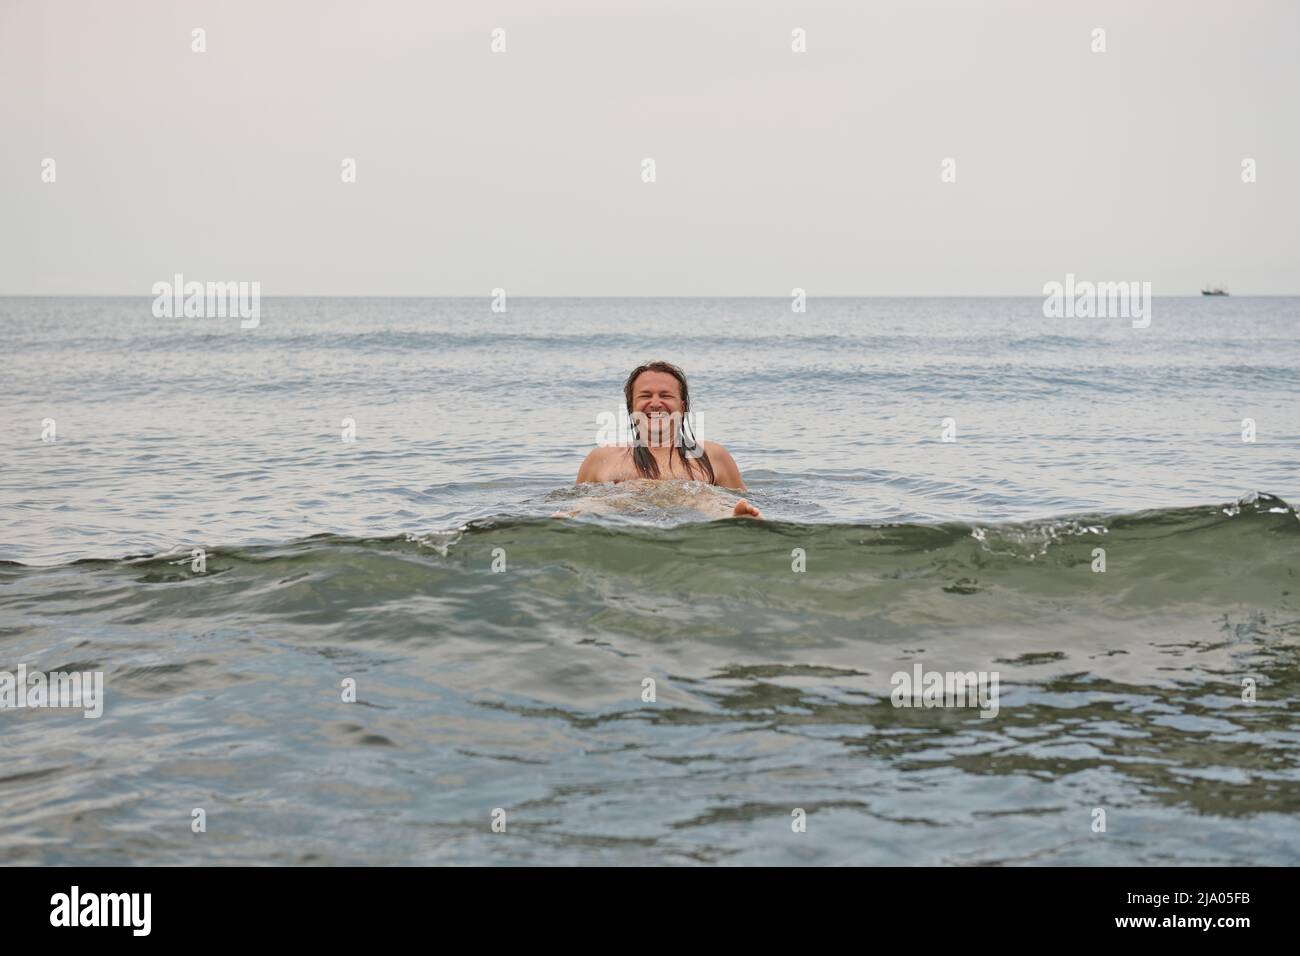 a man with long hair bathes in the sea Stock Photo